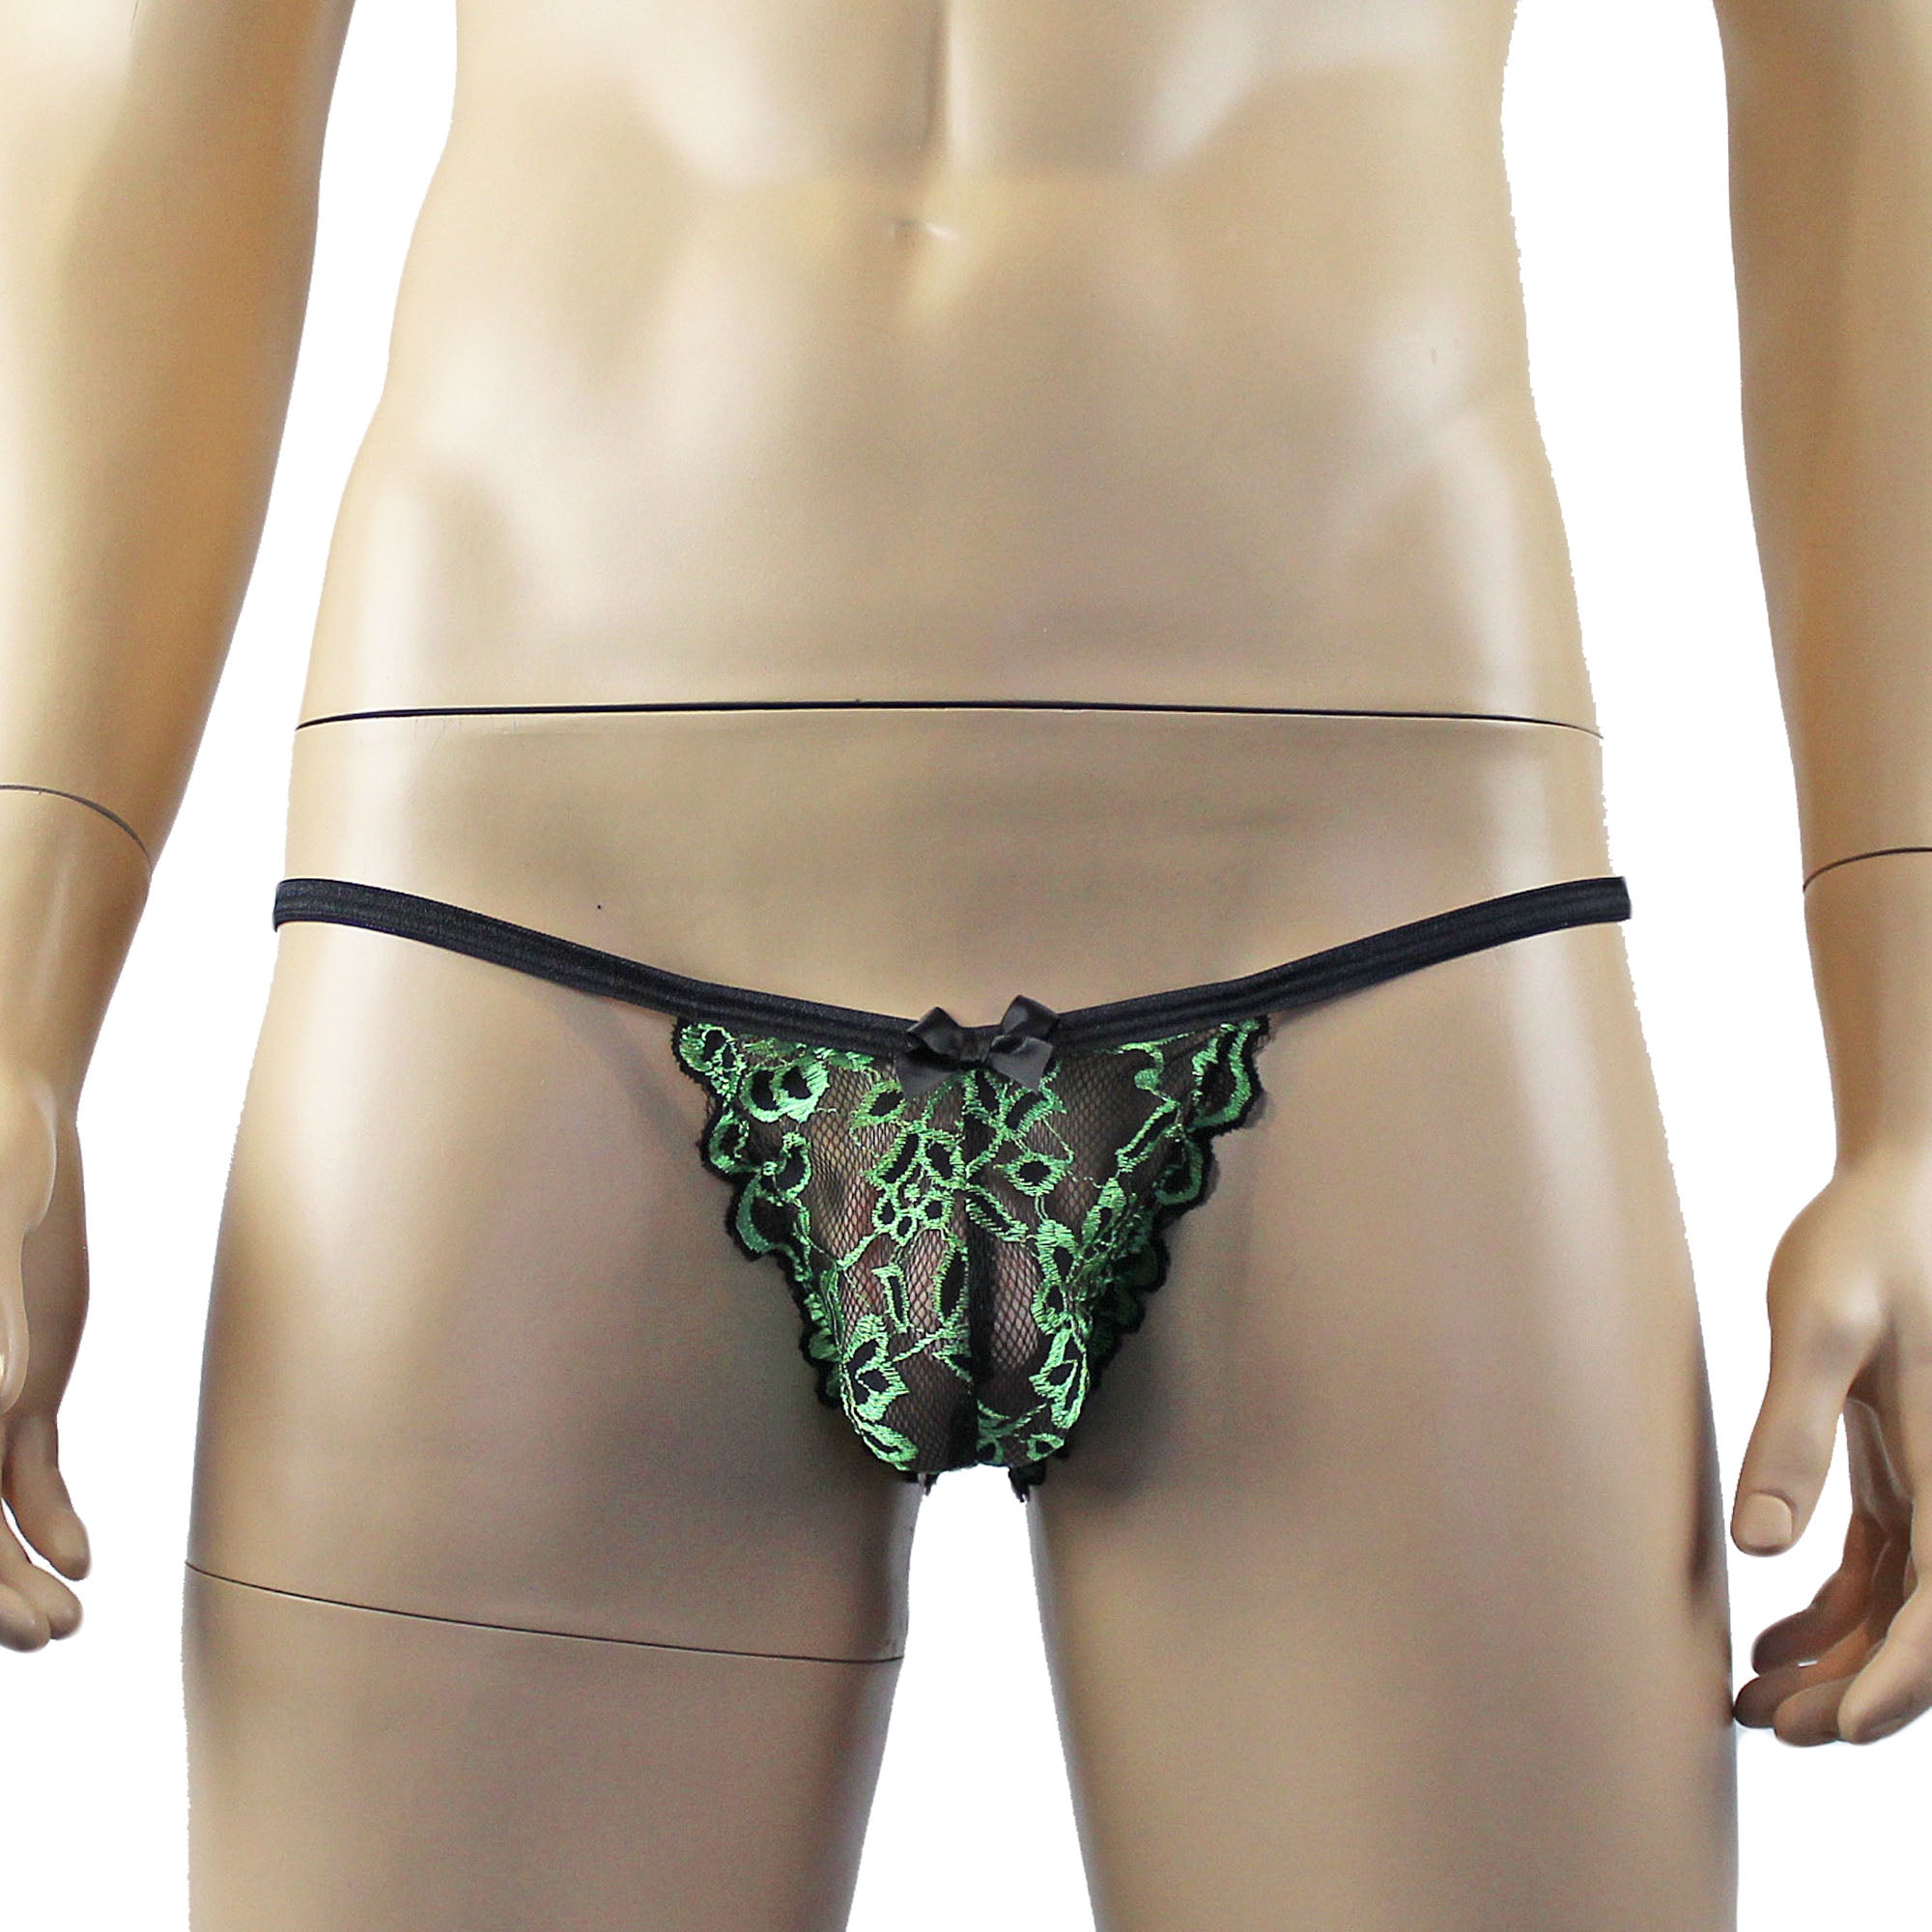 Mens Sassy Stretch Glitter Lace Pouch G string Black & Green